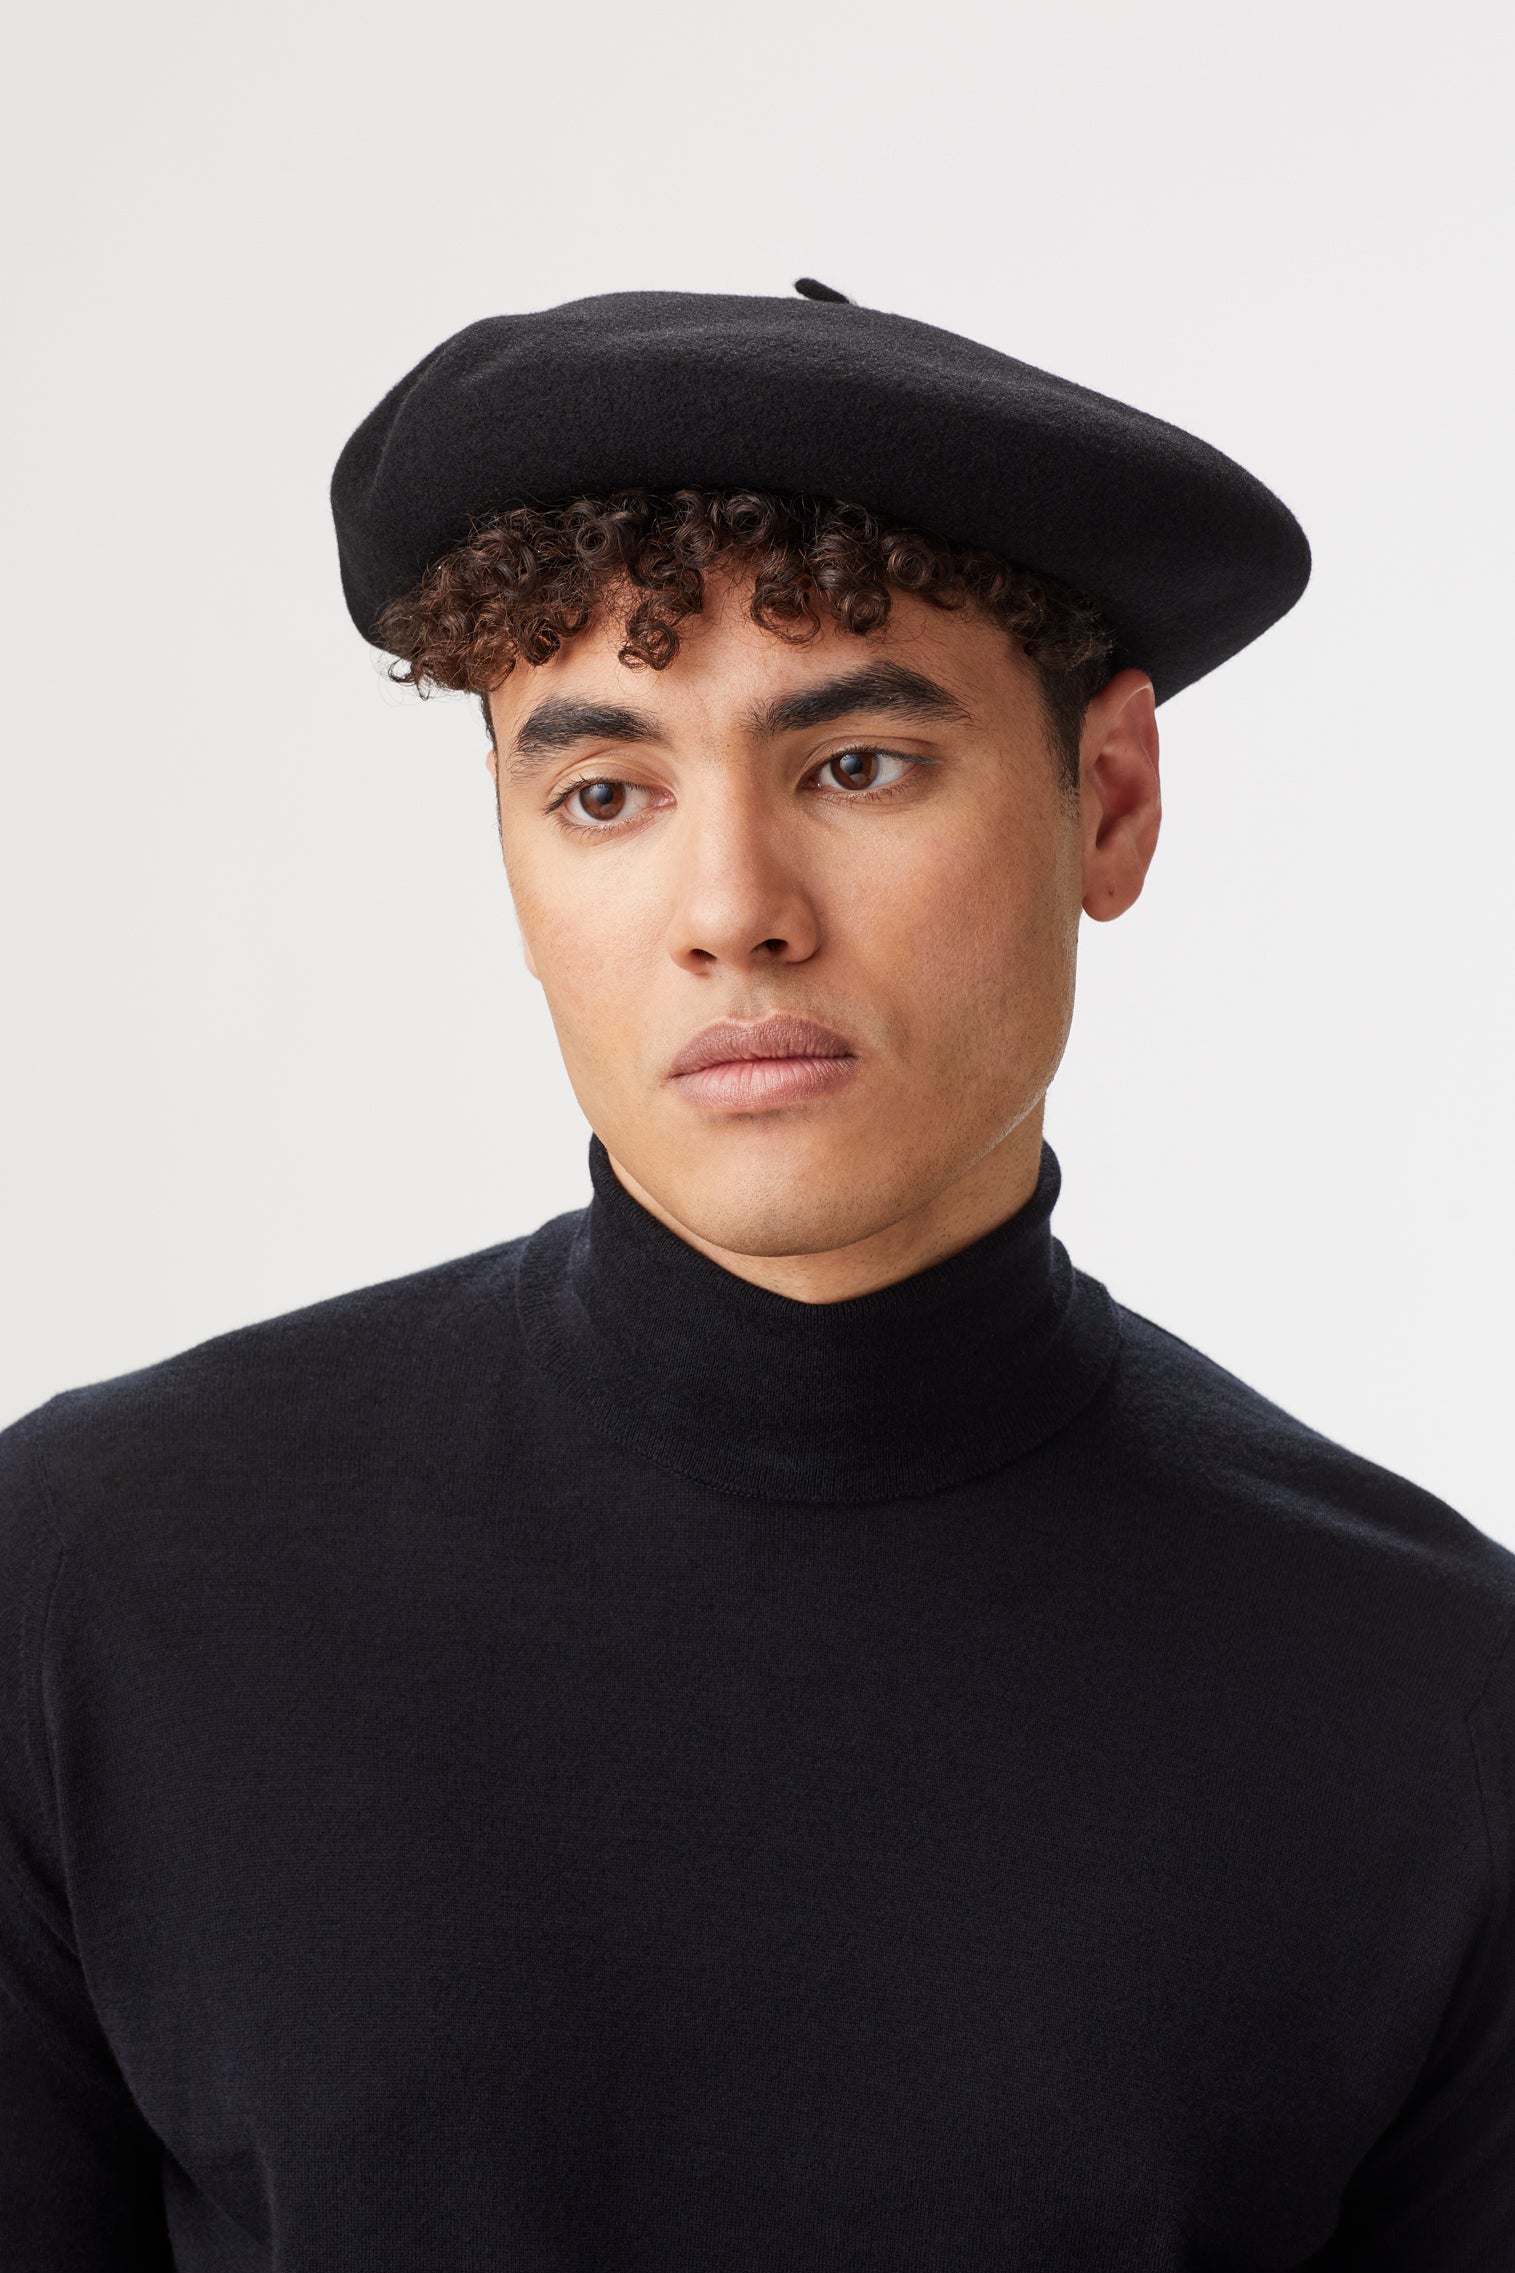 Basque Beret - Hats for Oval Face Shapes - Lock & Co. Hatters London UK